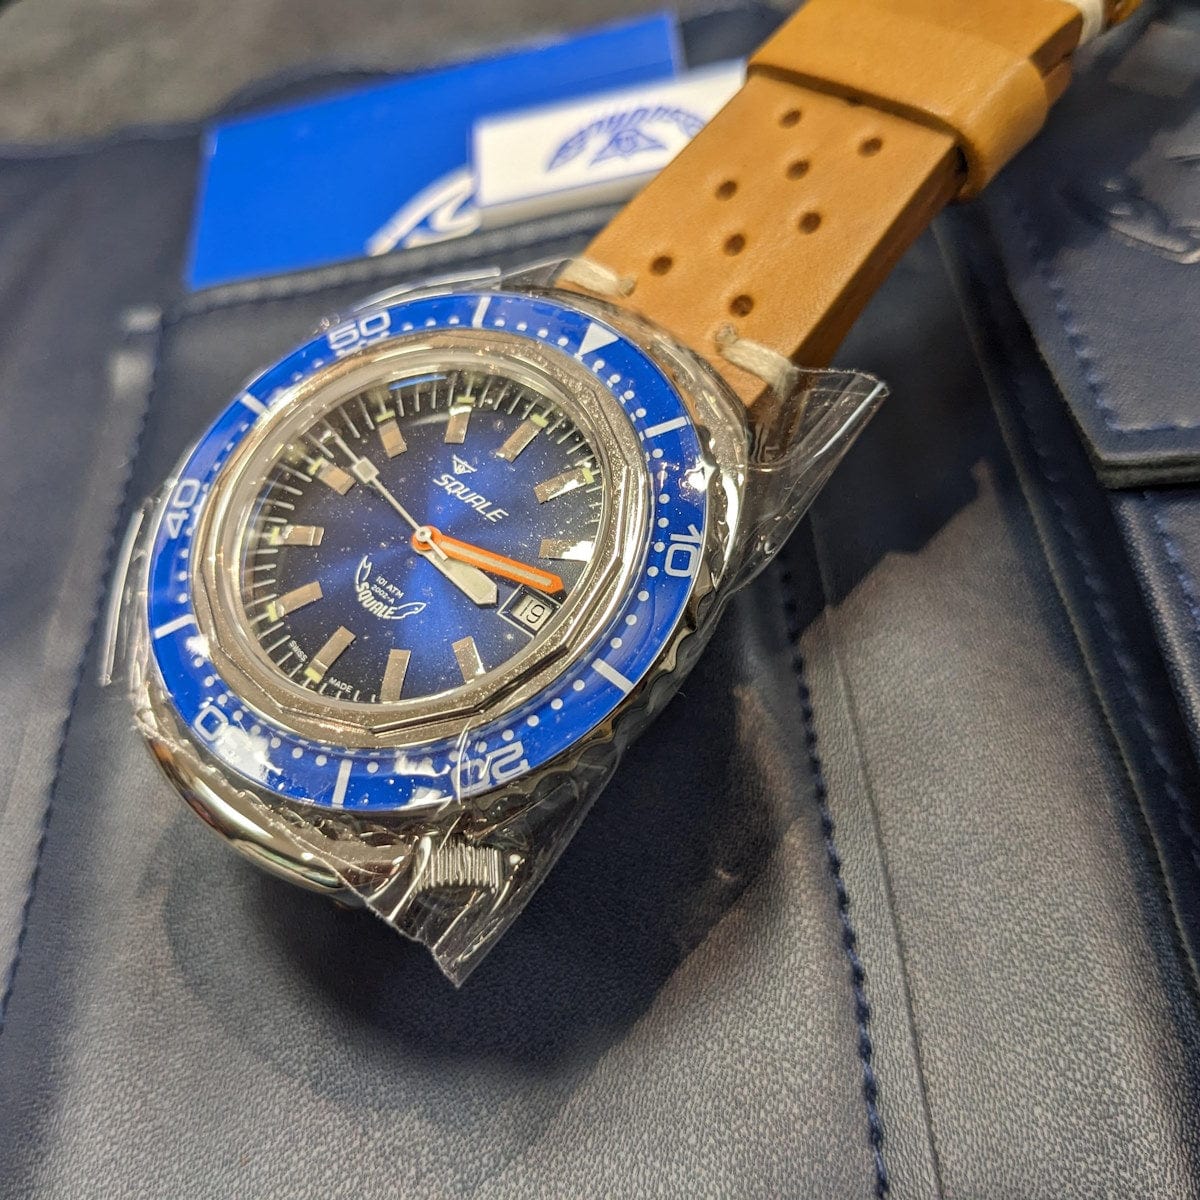 Squale 2002, Polished Case, Blue Sapphire Bezel, Blue Dial, Tan Leather - NEARLY NEW